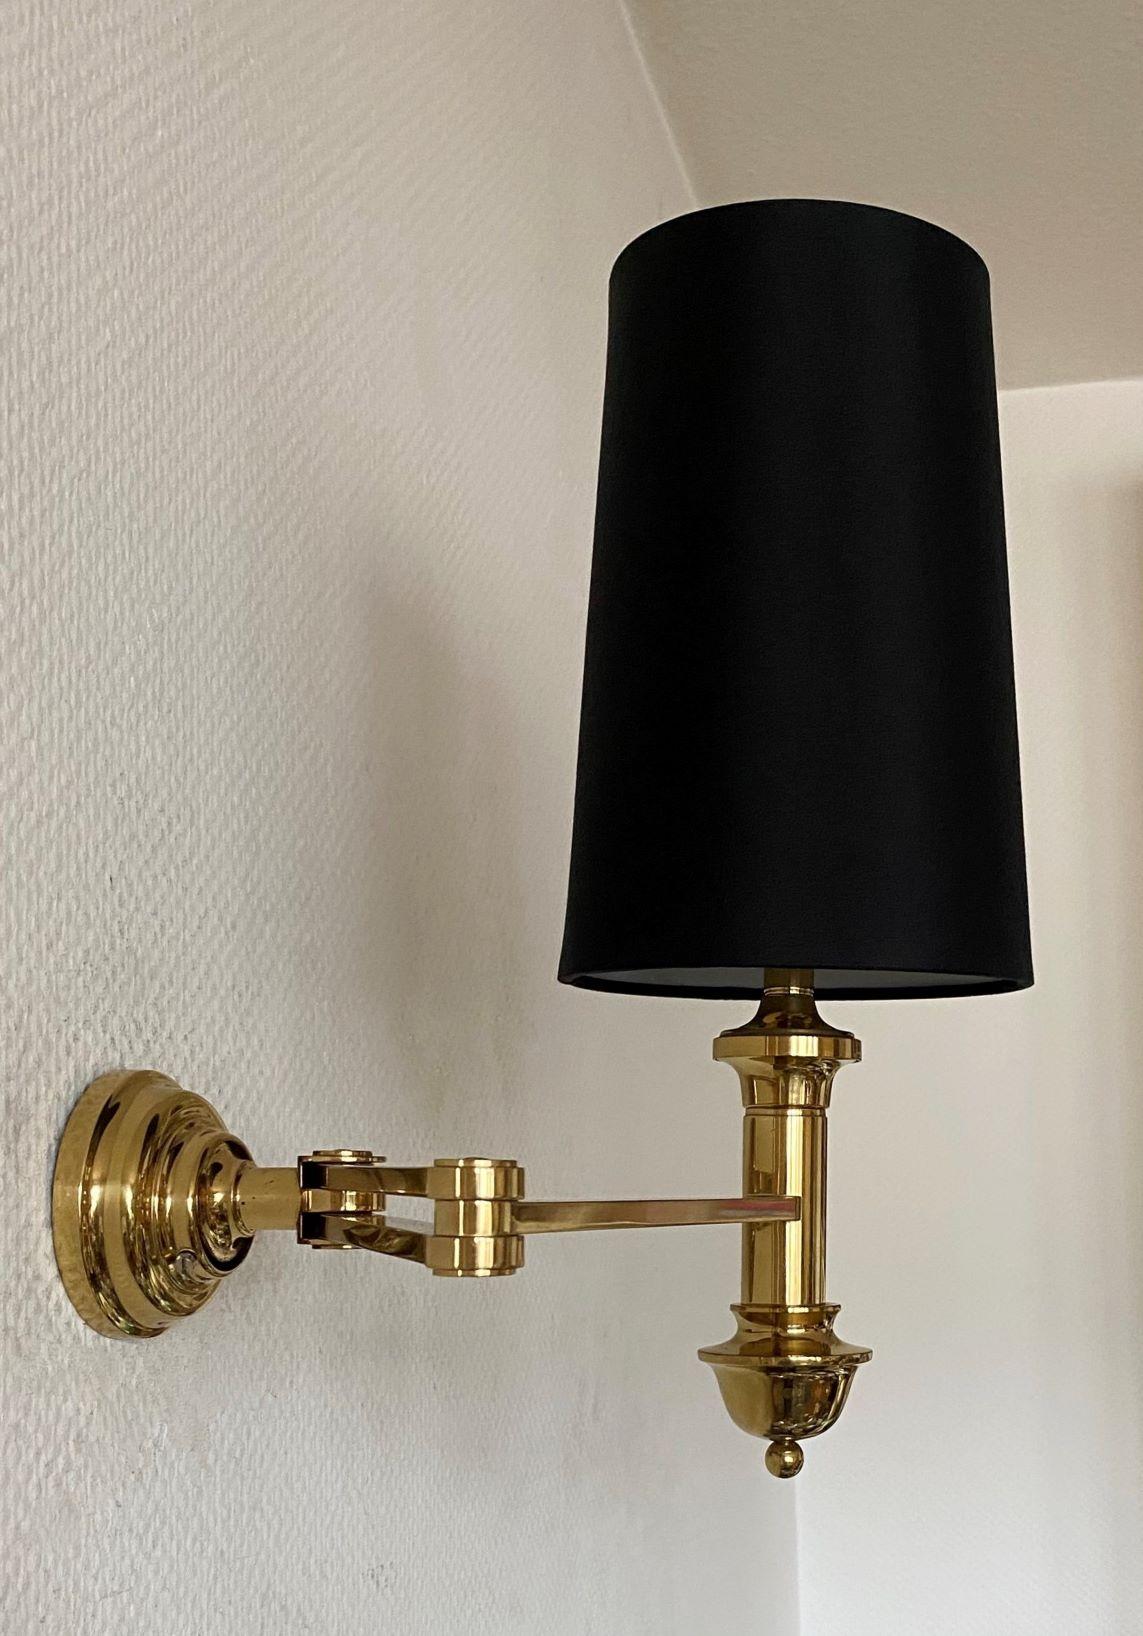 Pair of Brass Swing Arm Wall Lights, 1960s For Sale 4